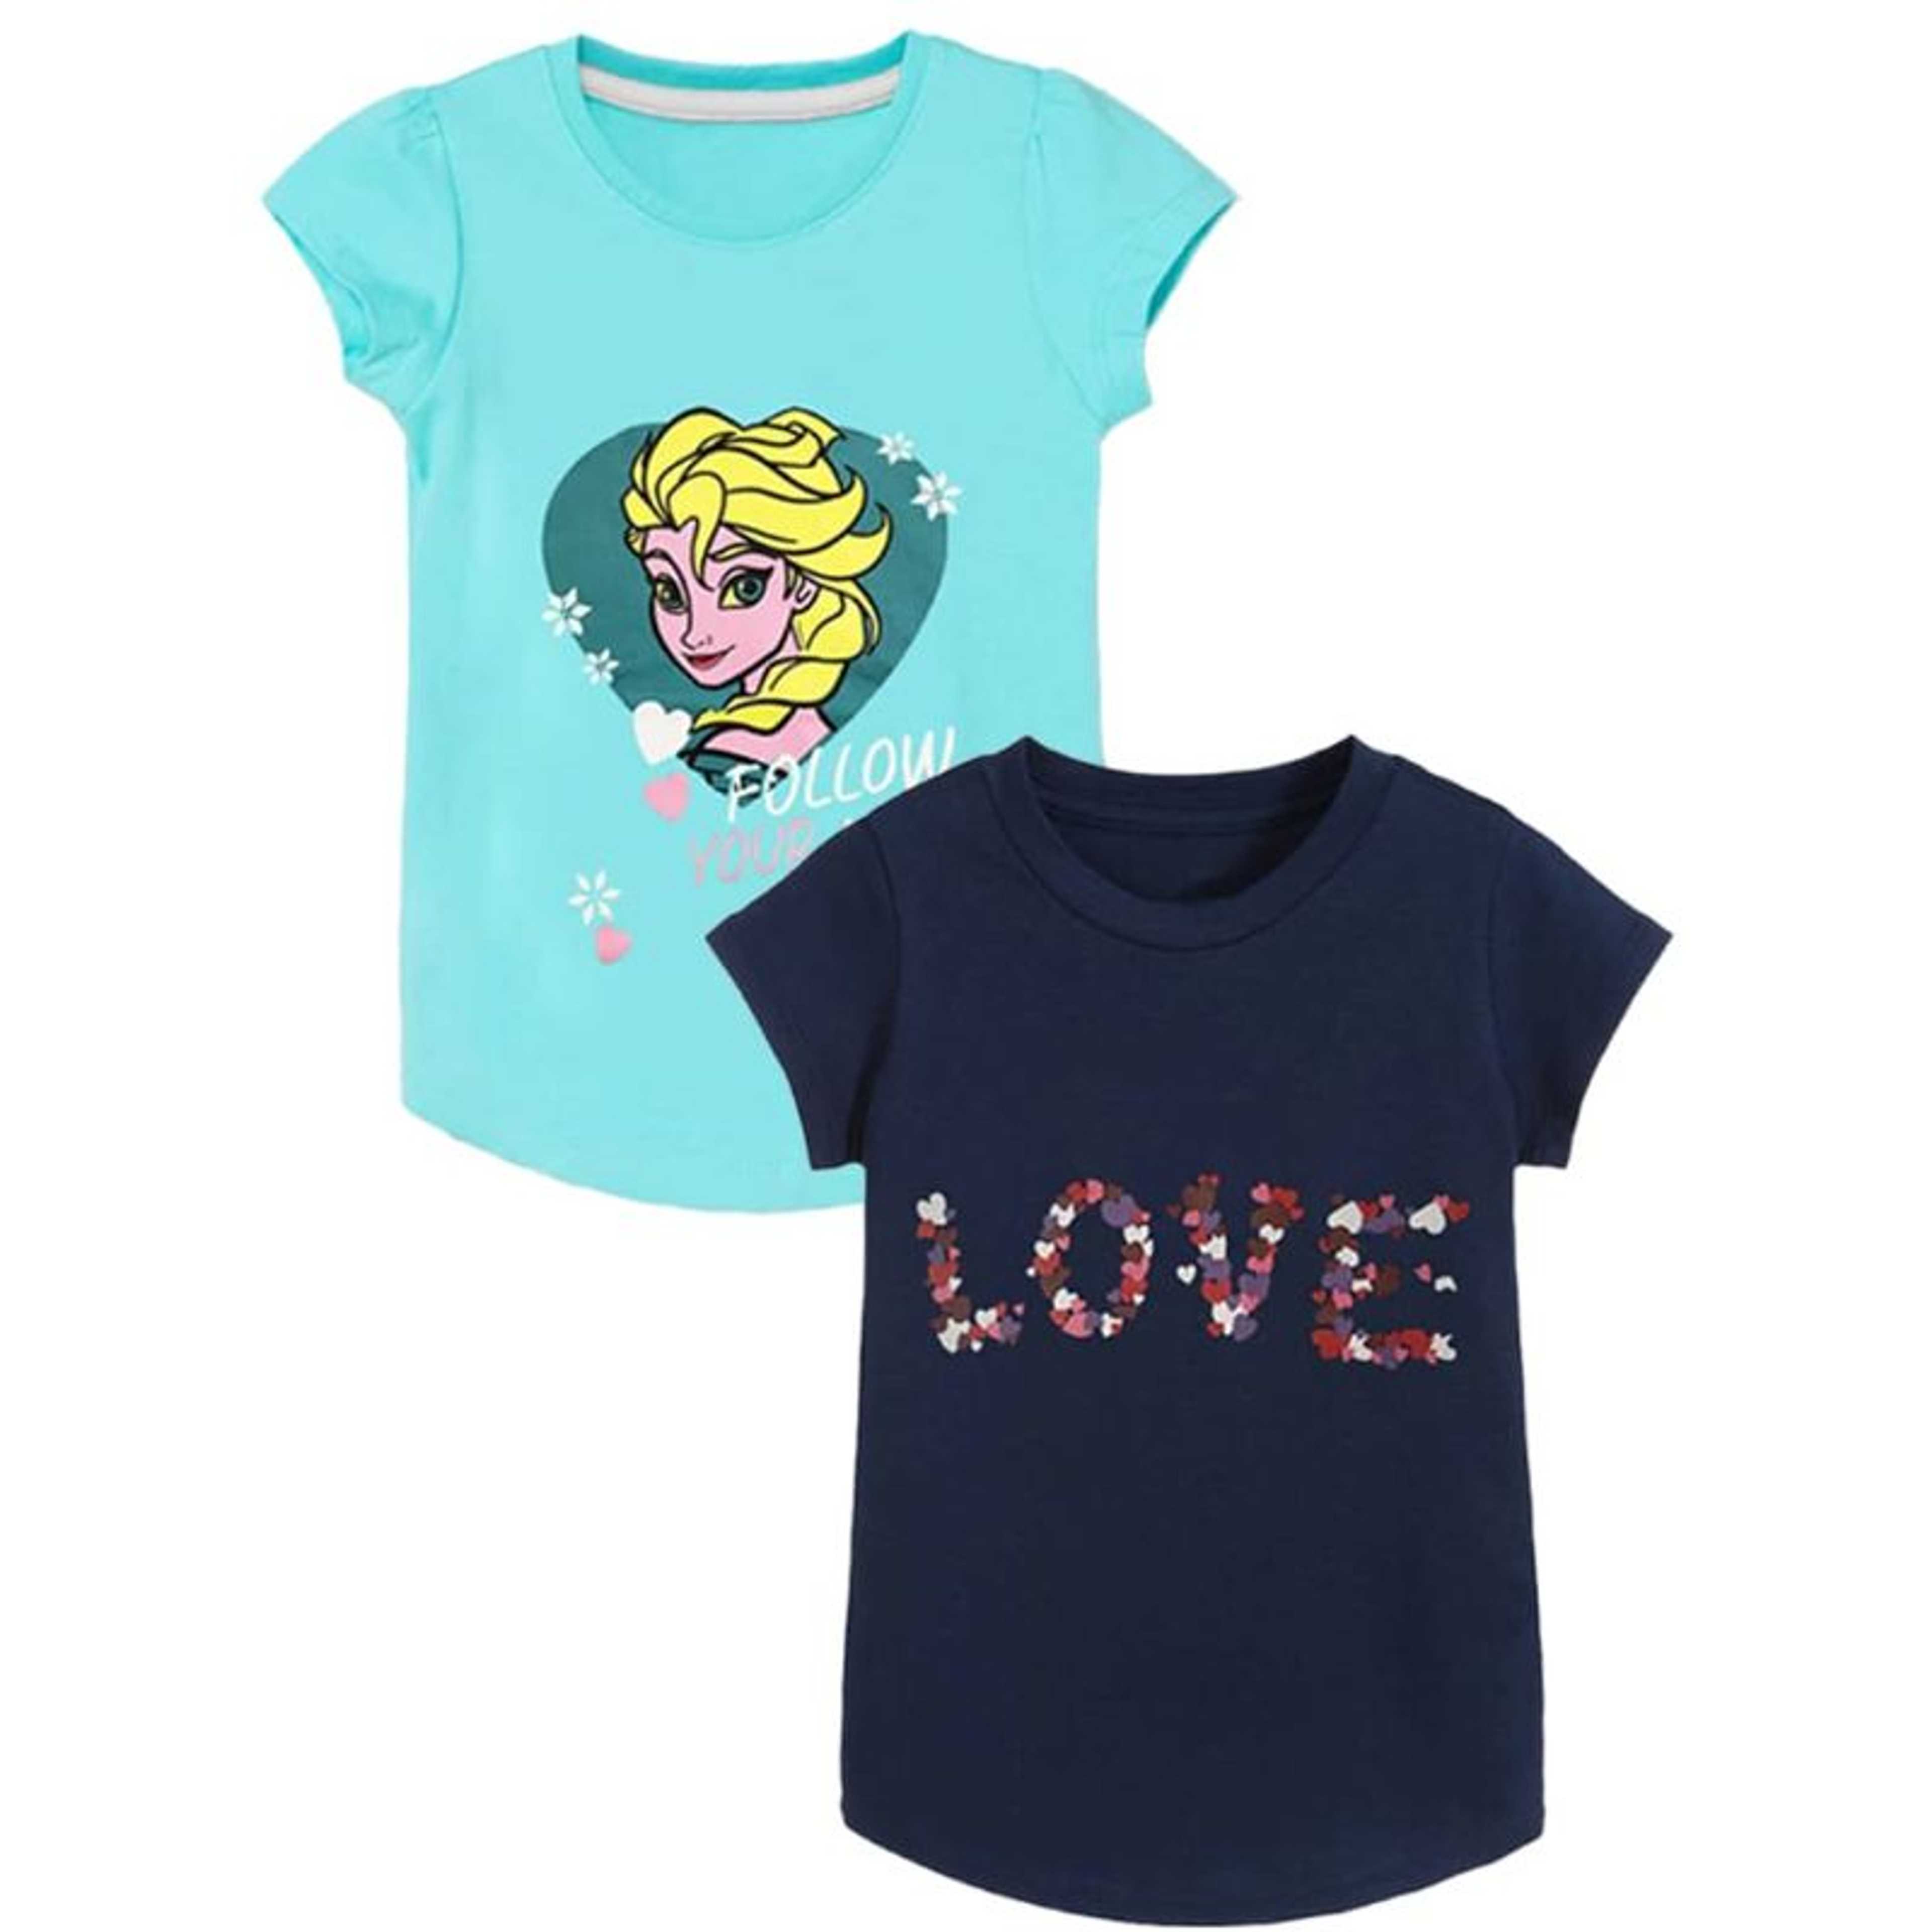 PACK OF 2 MIX GIRLS T-SHIRTS